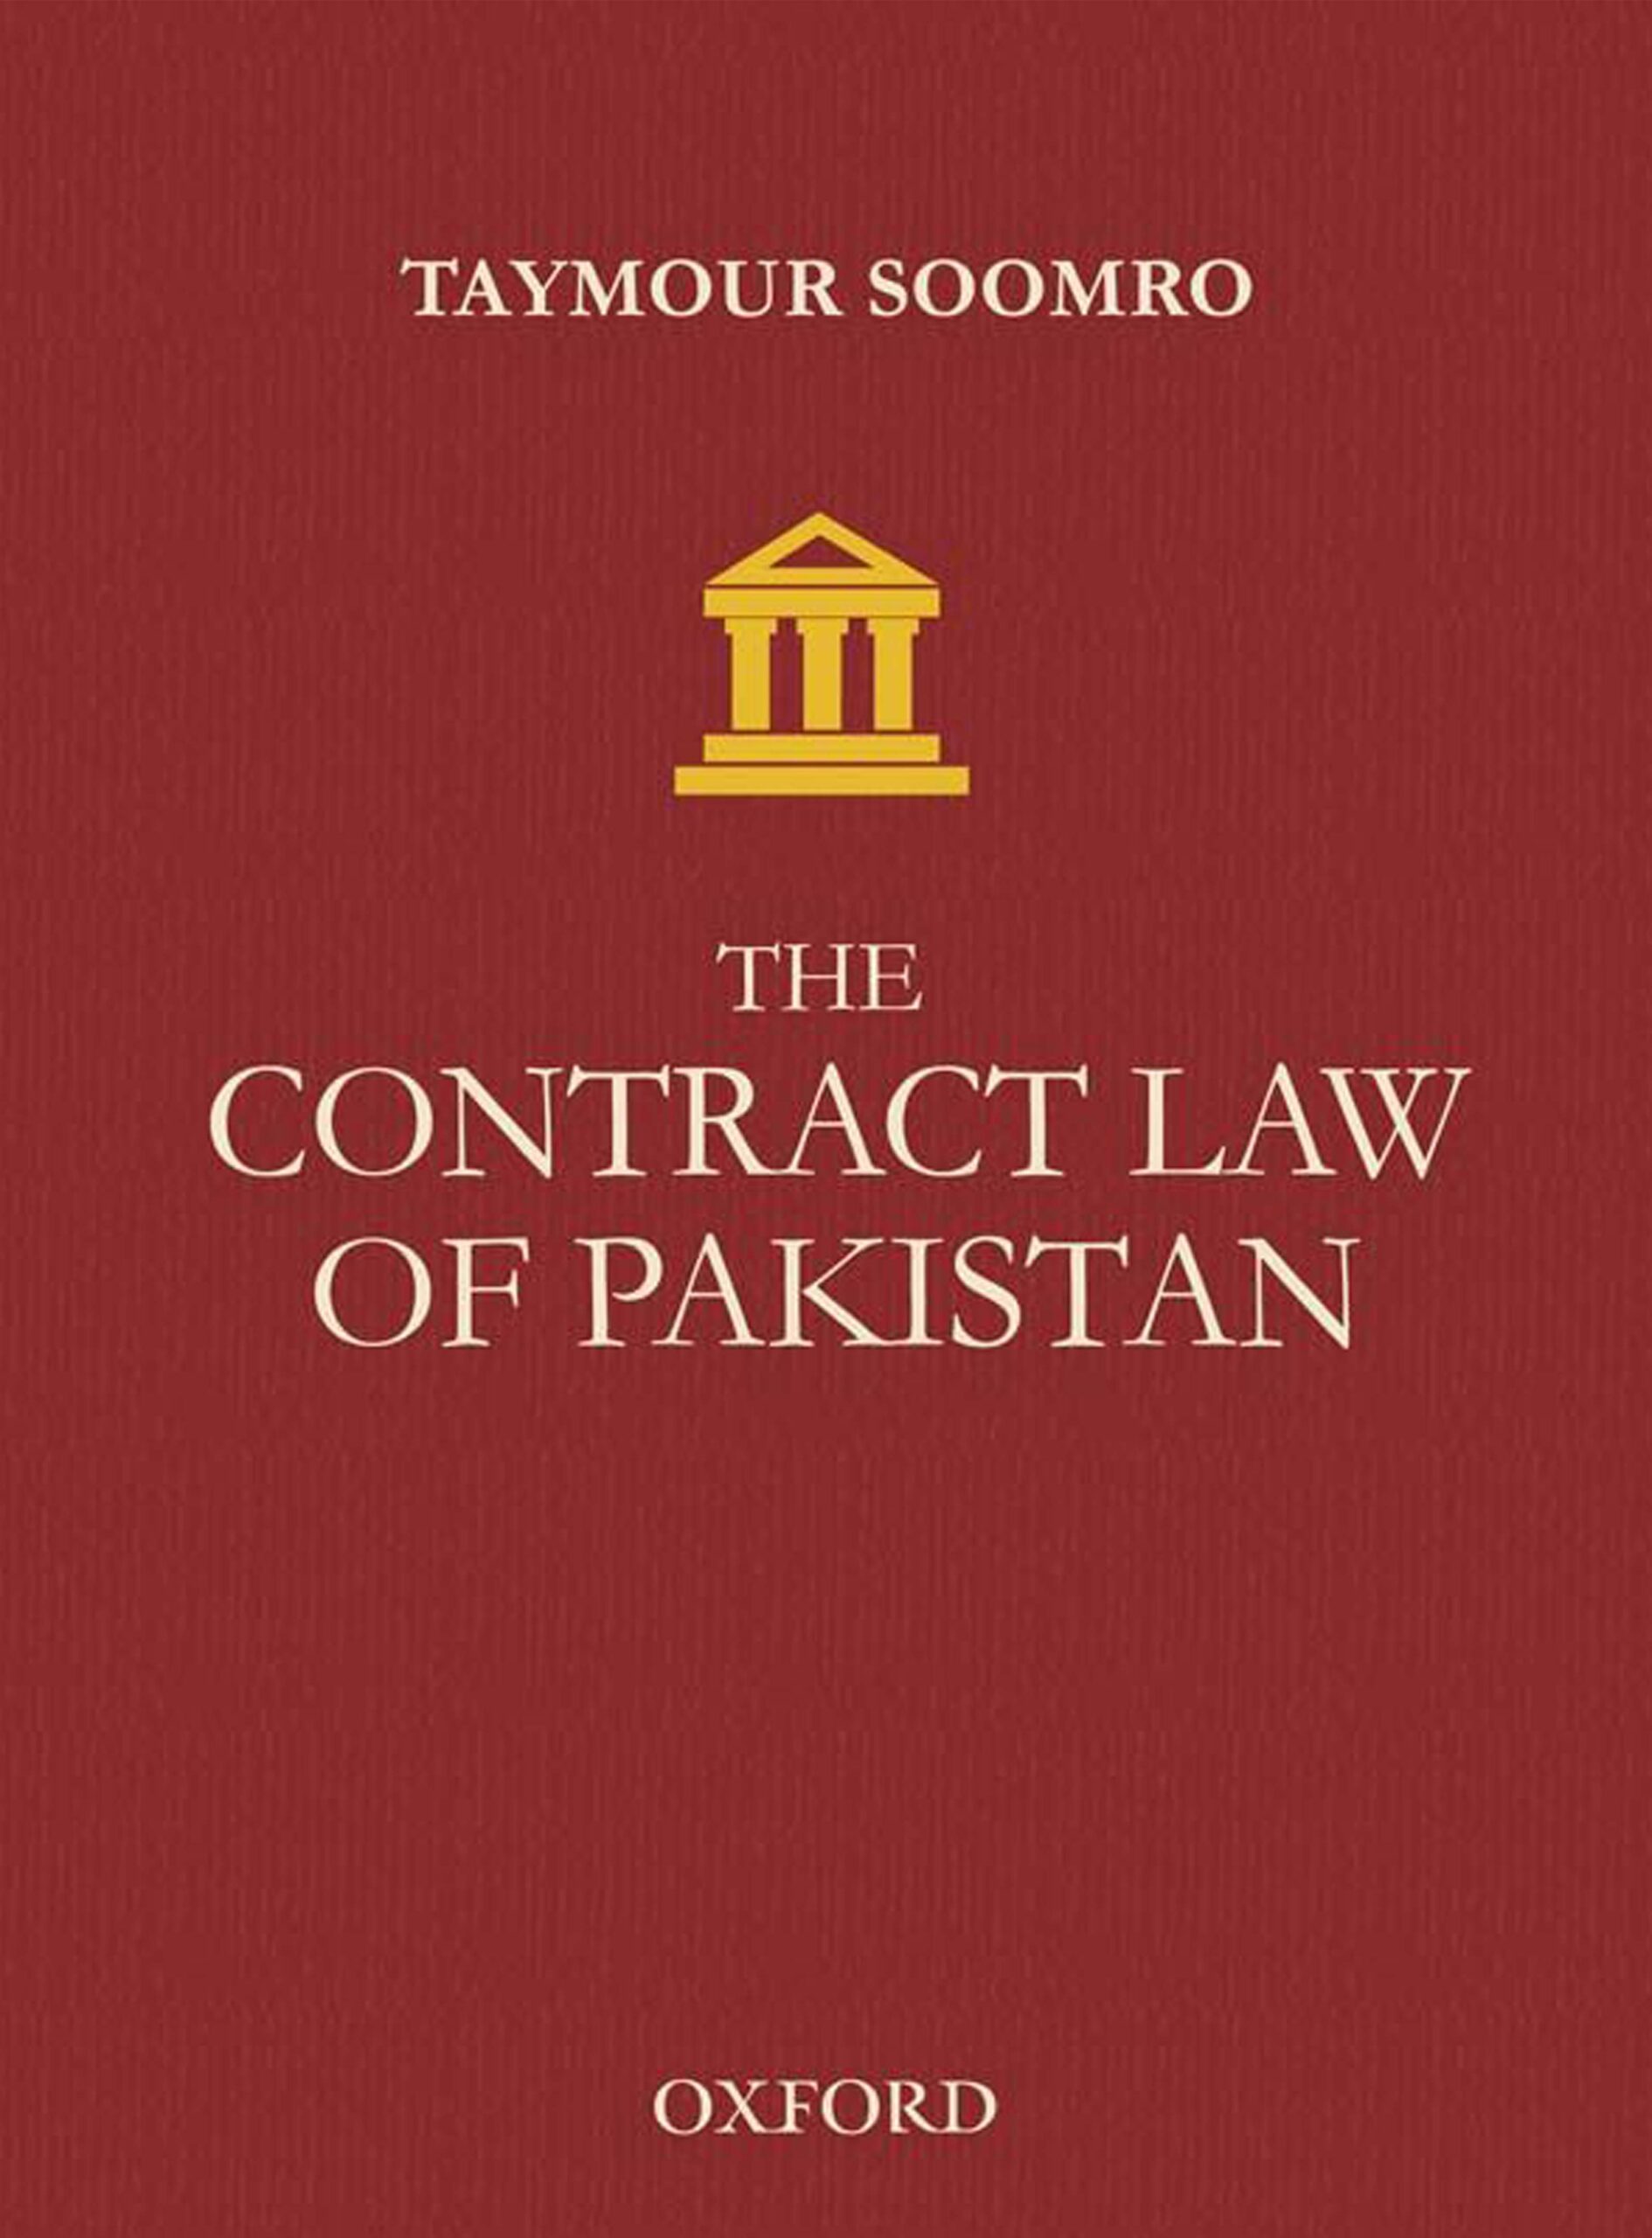 Cover of the book - The Contract Law of Pakistan by Taymour Soomro